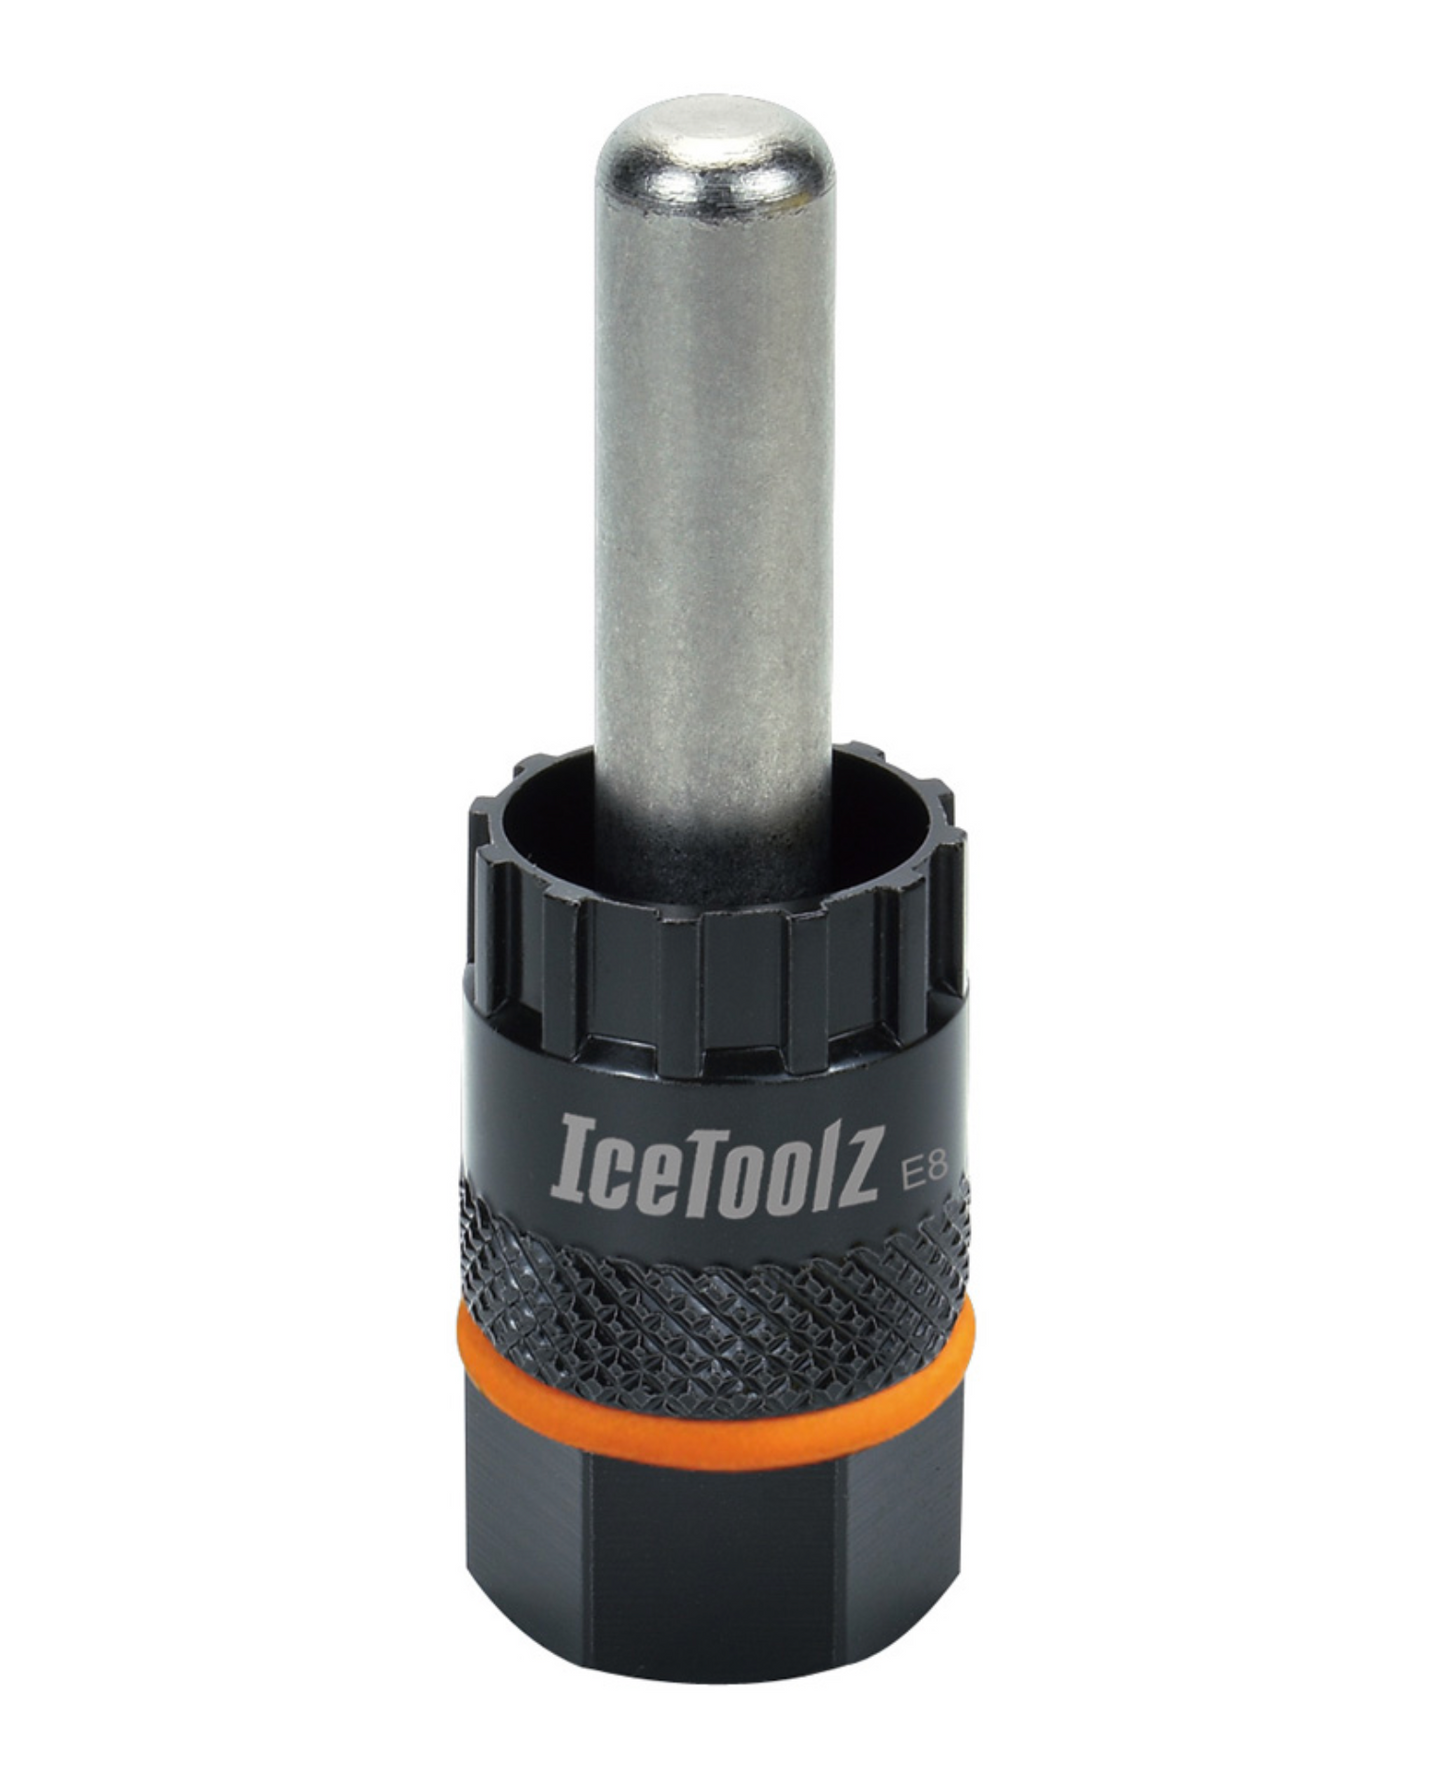 IceToolz Cassette Lockring Tool w/12mm guide pin